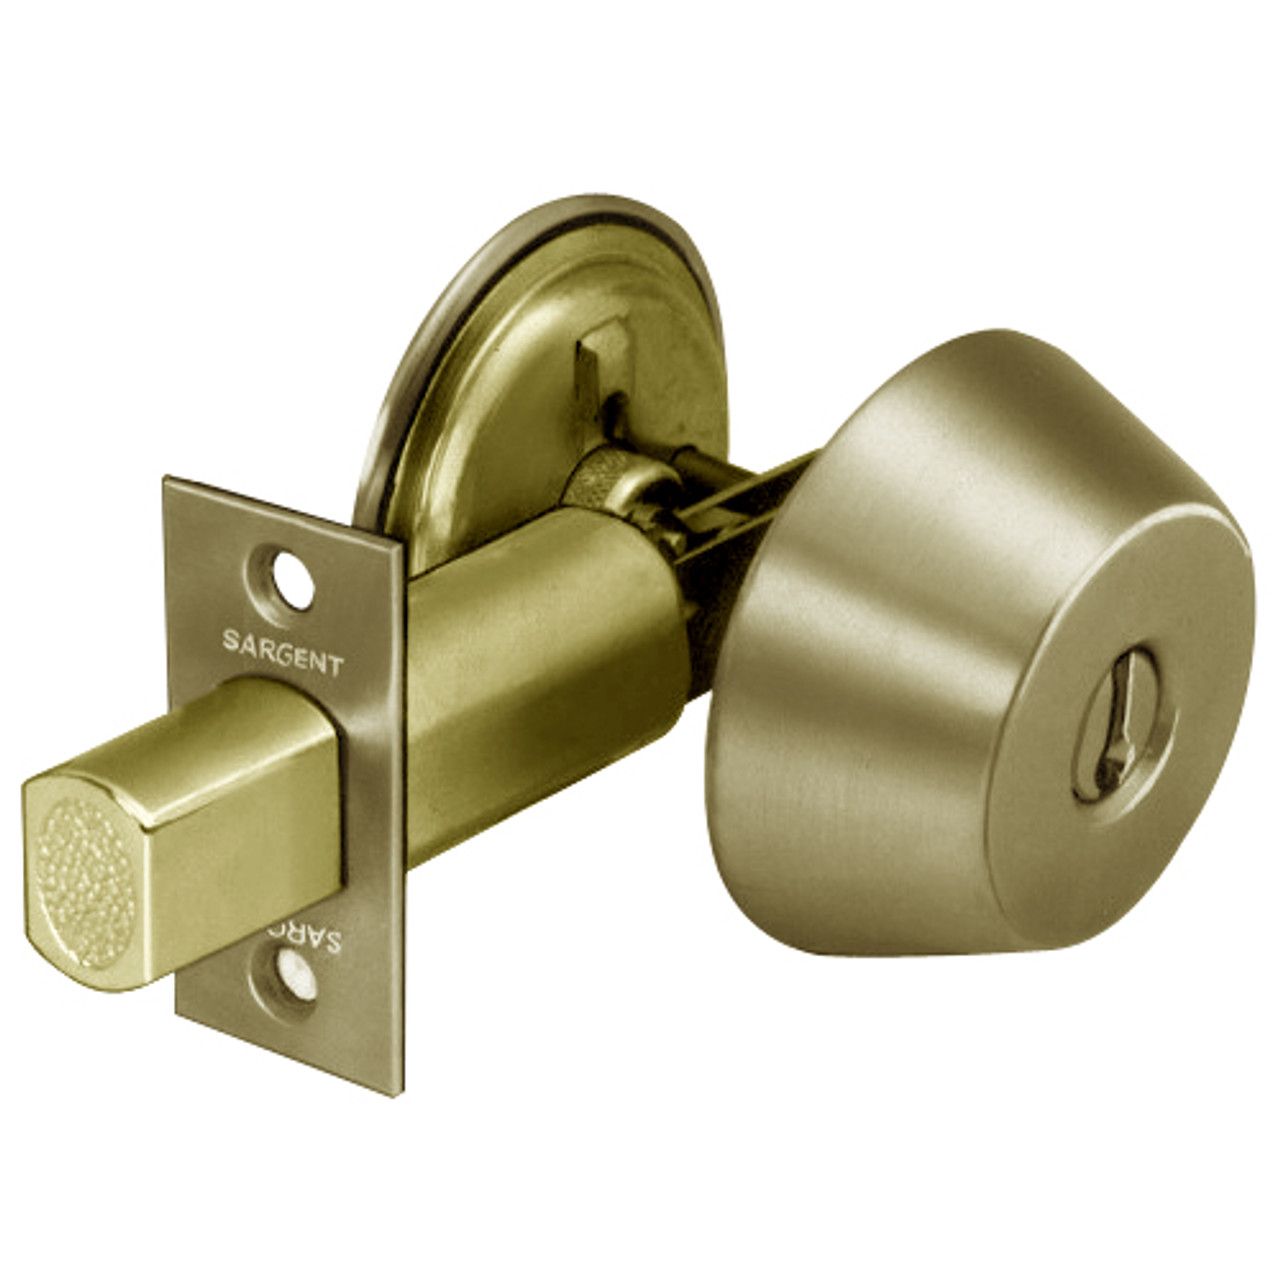 28-486-04 Sargent 480 Series Single Cylinder Auxiliary Deadbolt Lock with Blank Plate in Satin Brass